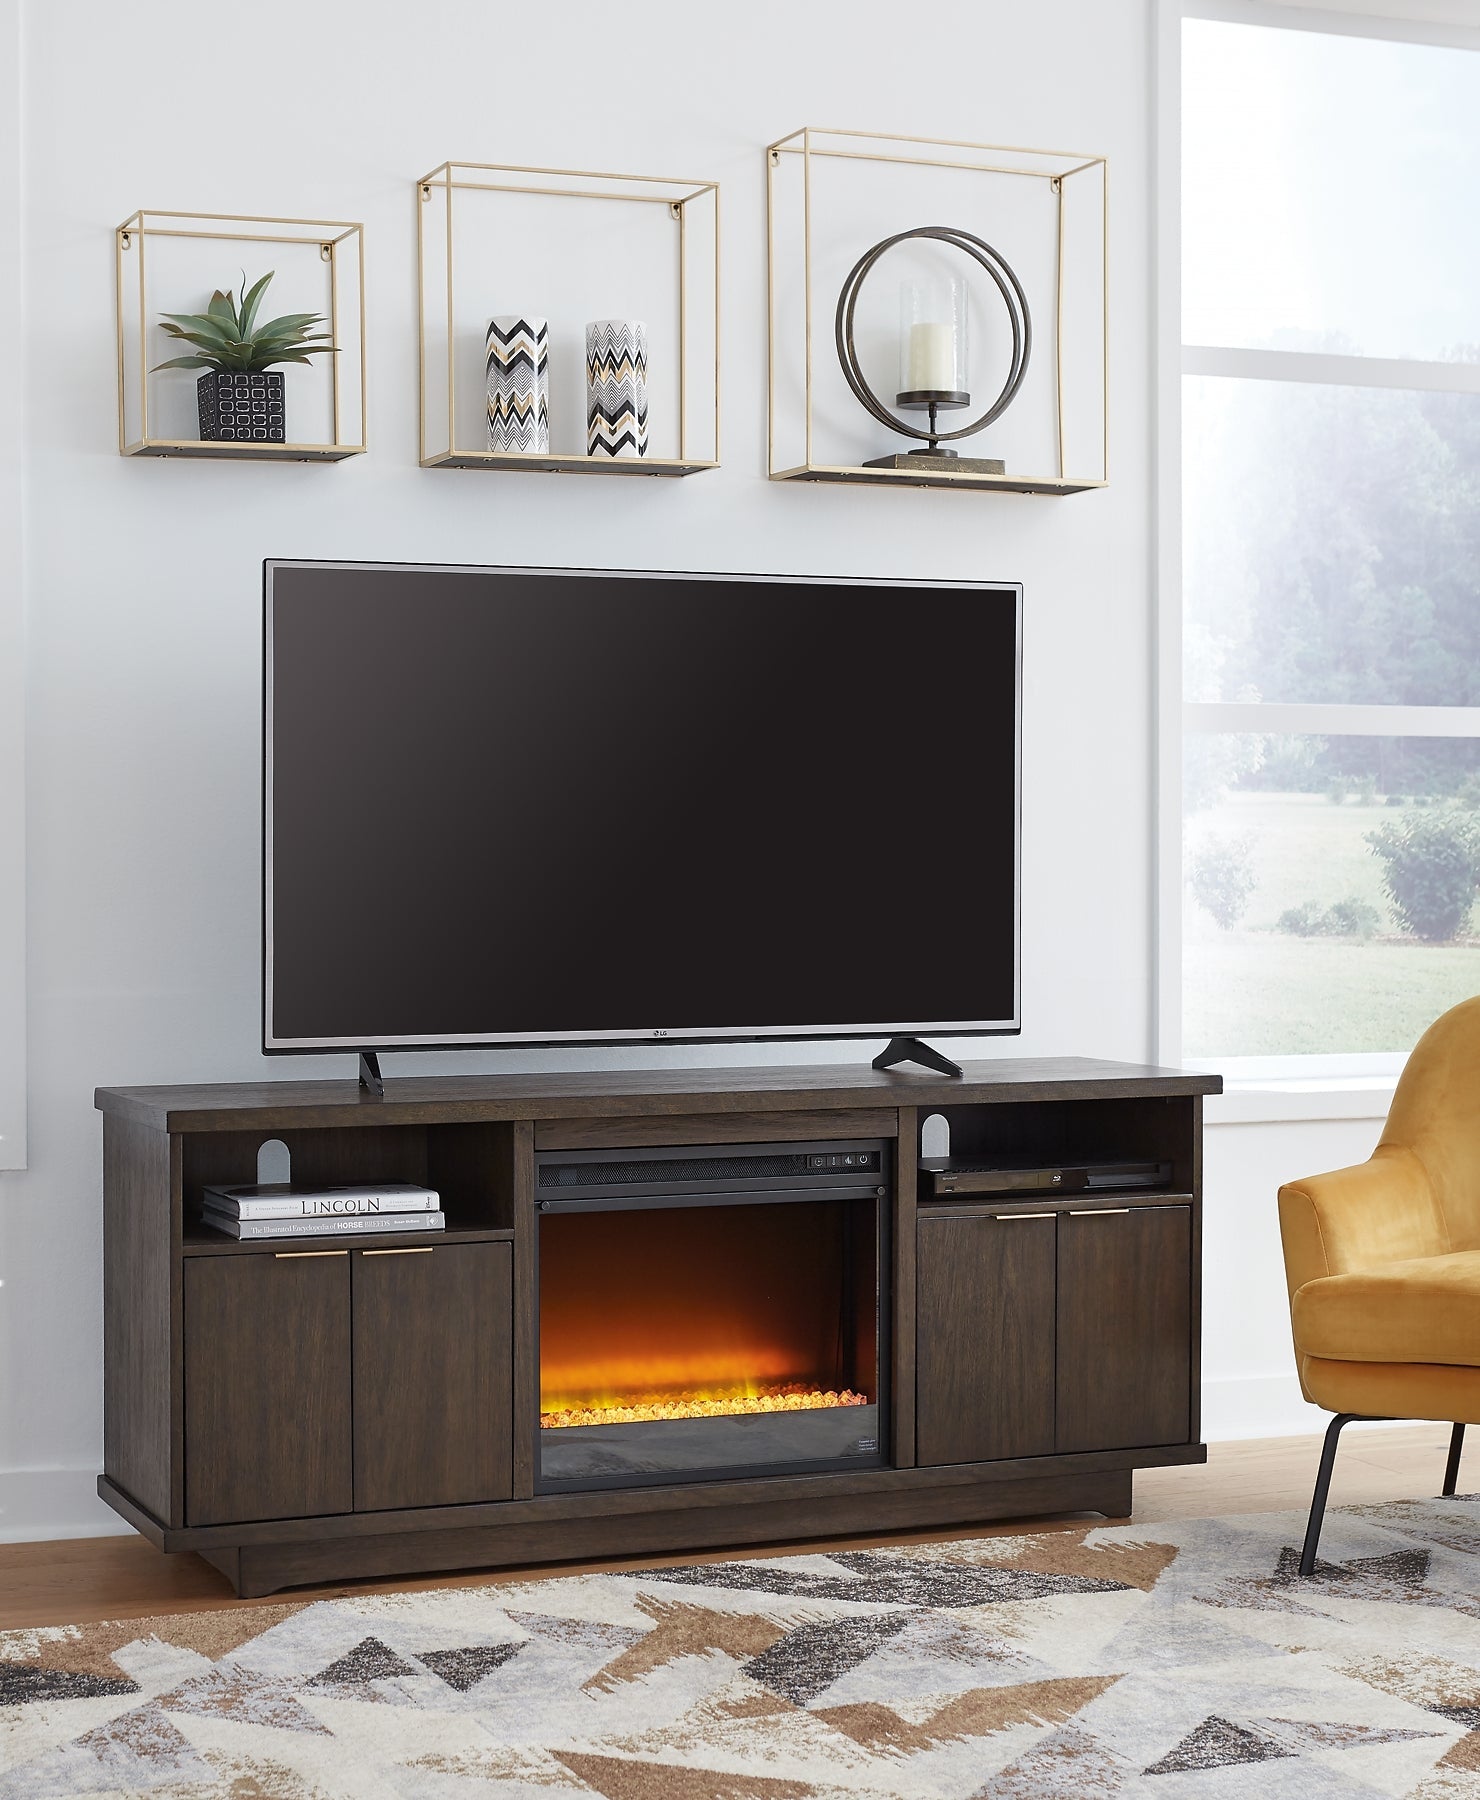 Brazburn 66" TV Stand with Electric Fireplace